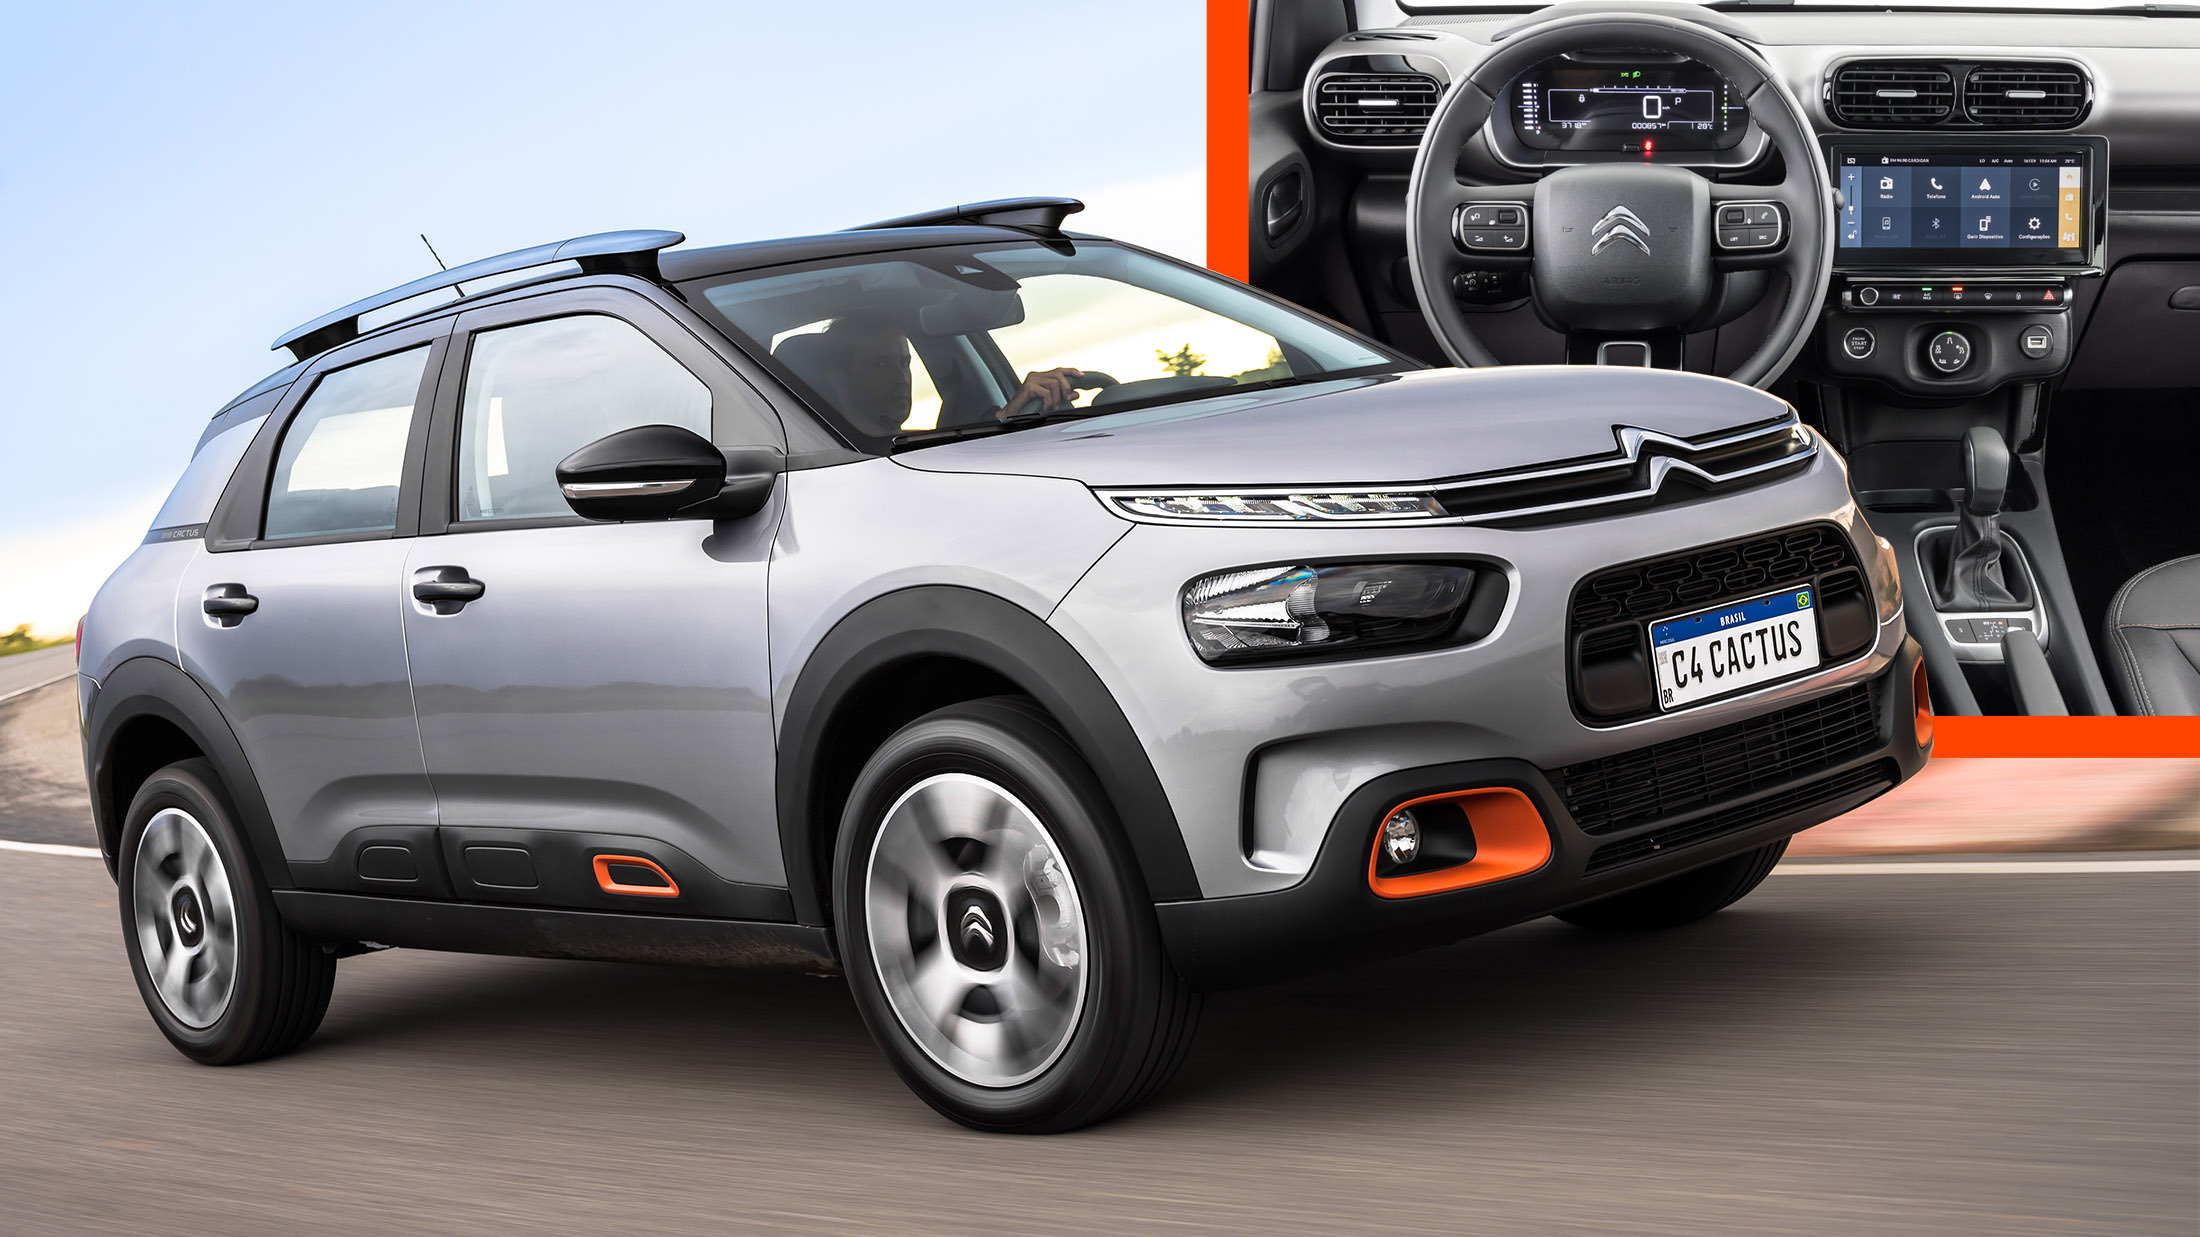 Citroen C4 Cactus Soldiers On In South America, Now With A Larger